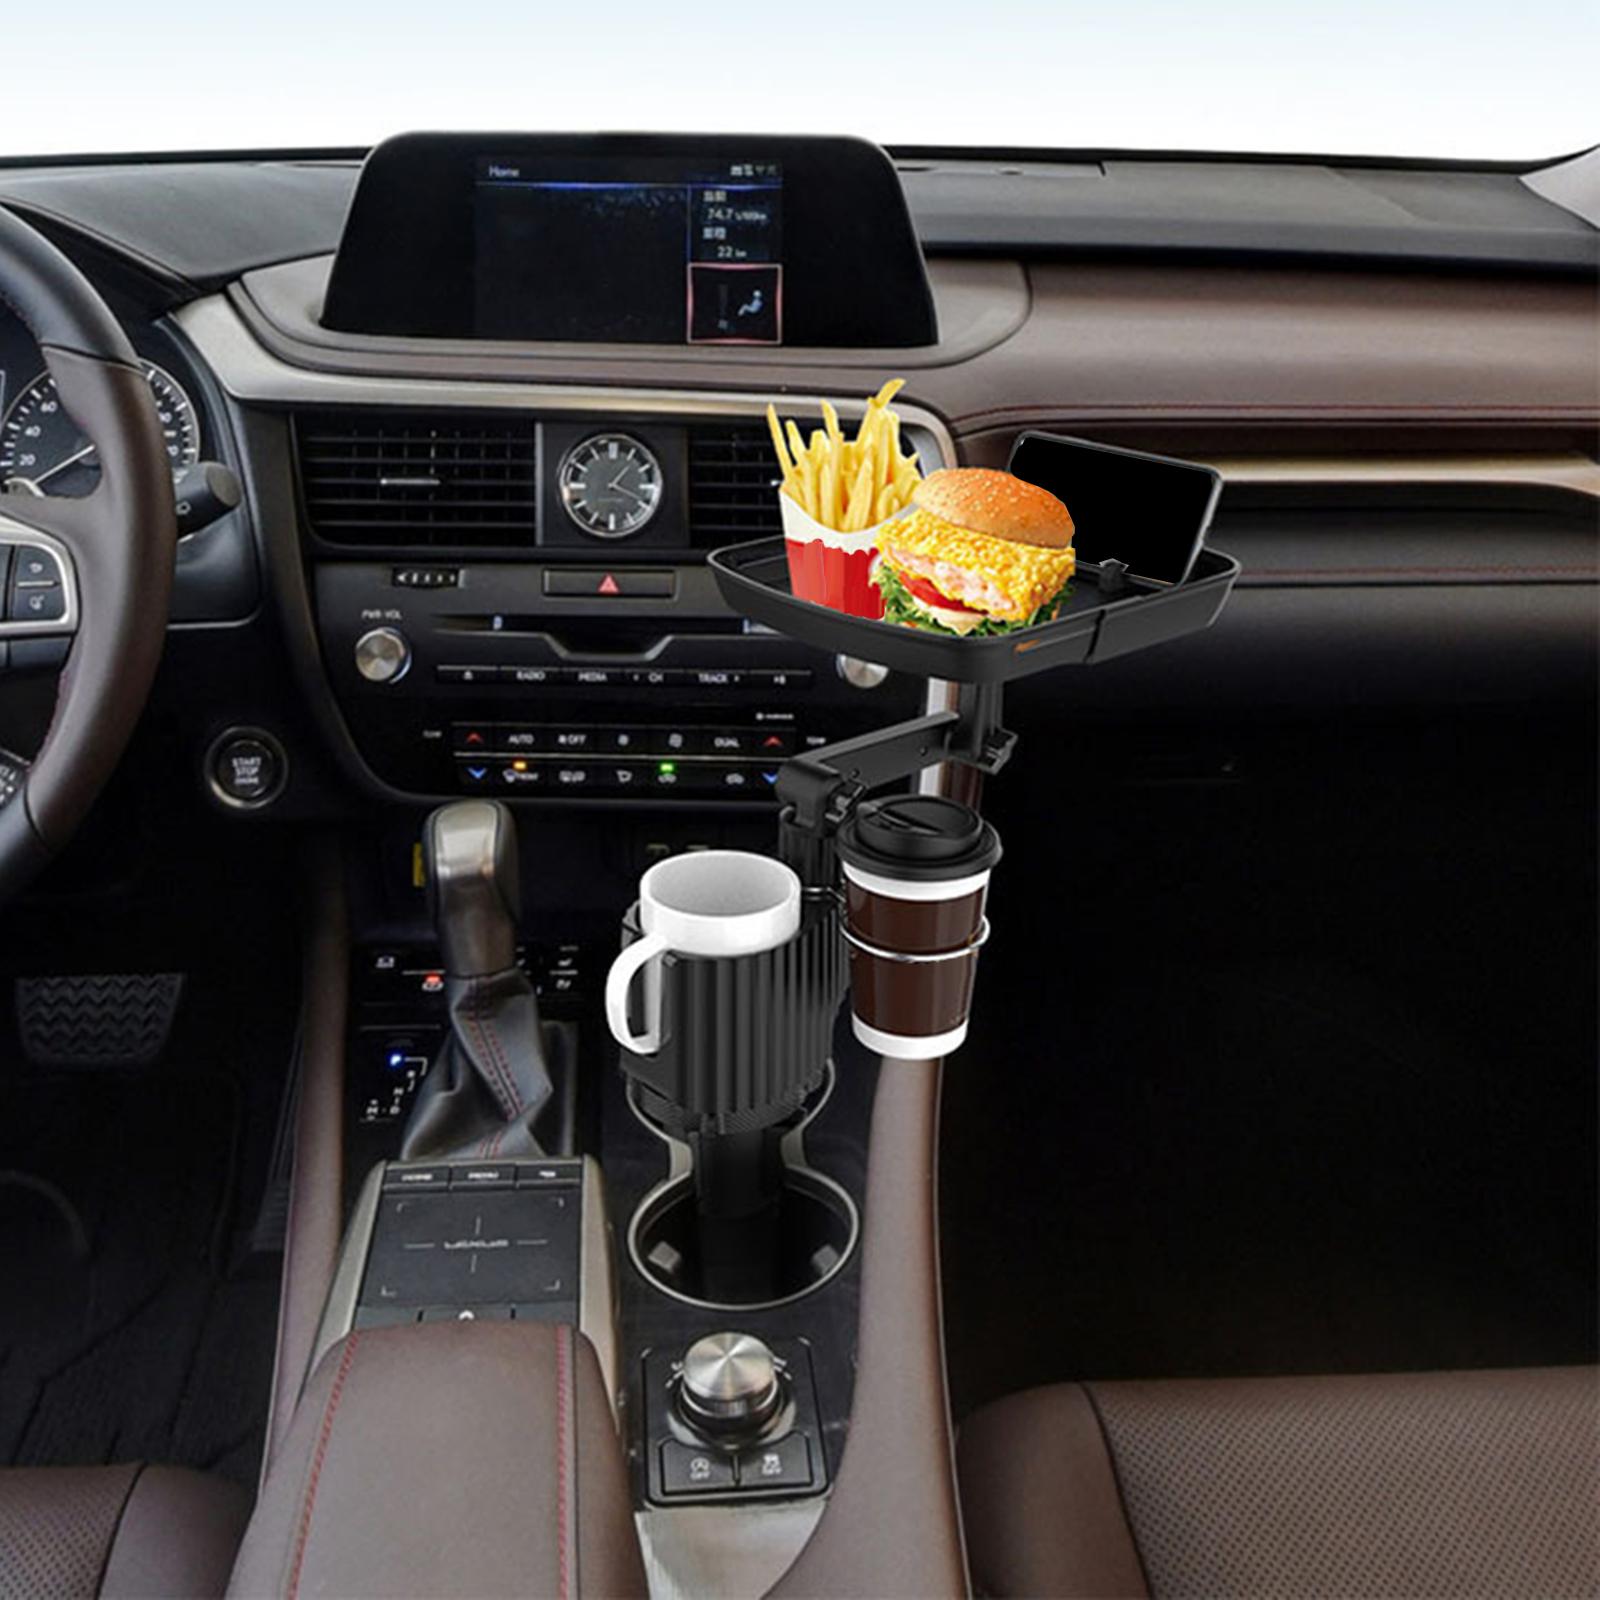 Car Food Table Cup Holders Adjustable Support Frame Extendable Base Premium Quality for Most Car Dining Sturdy Easy to Clean